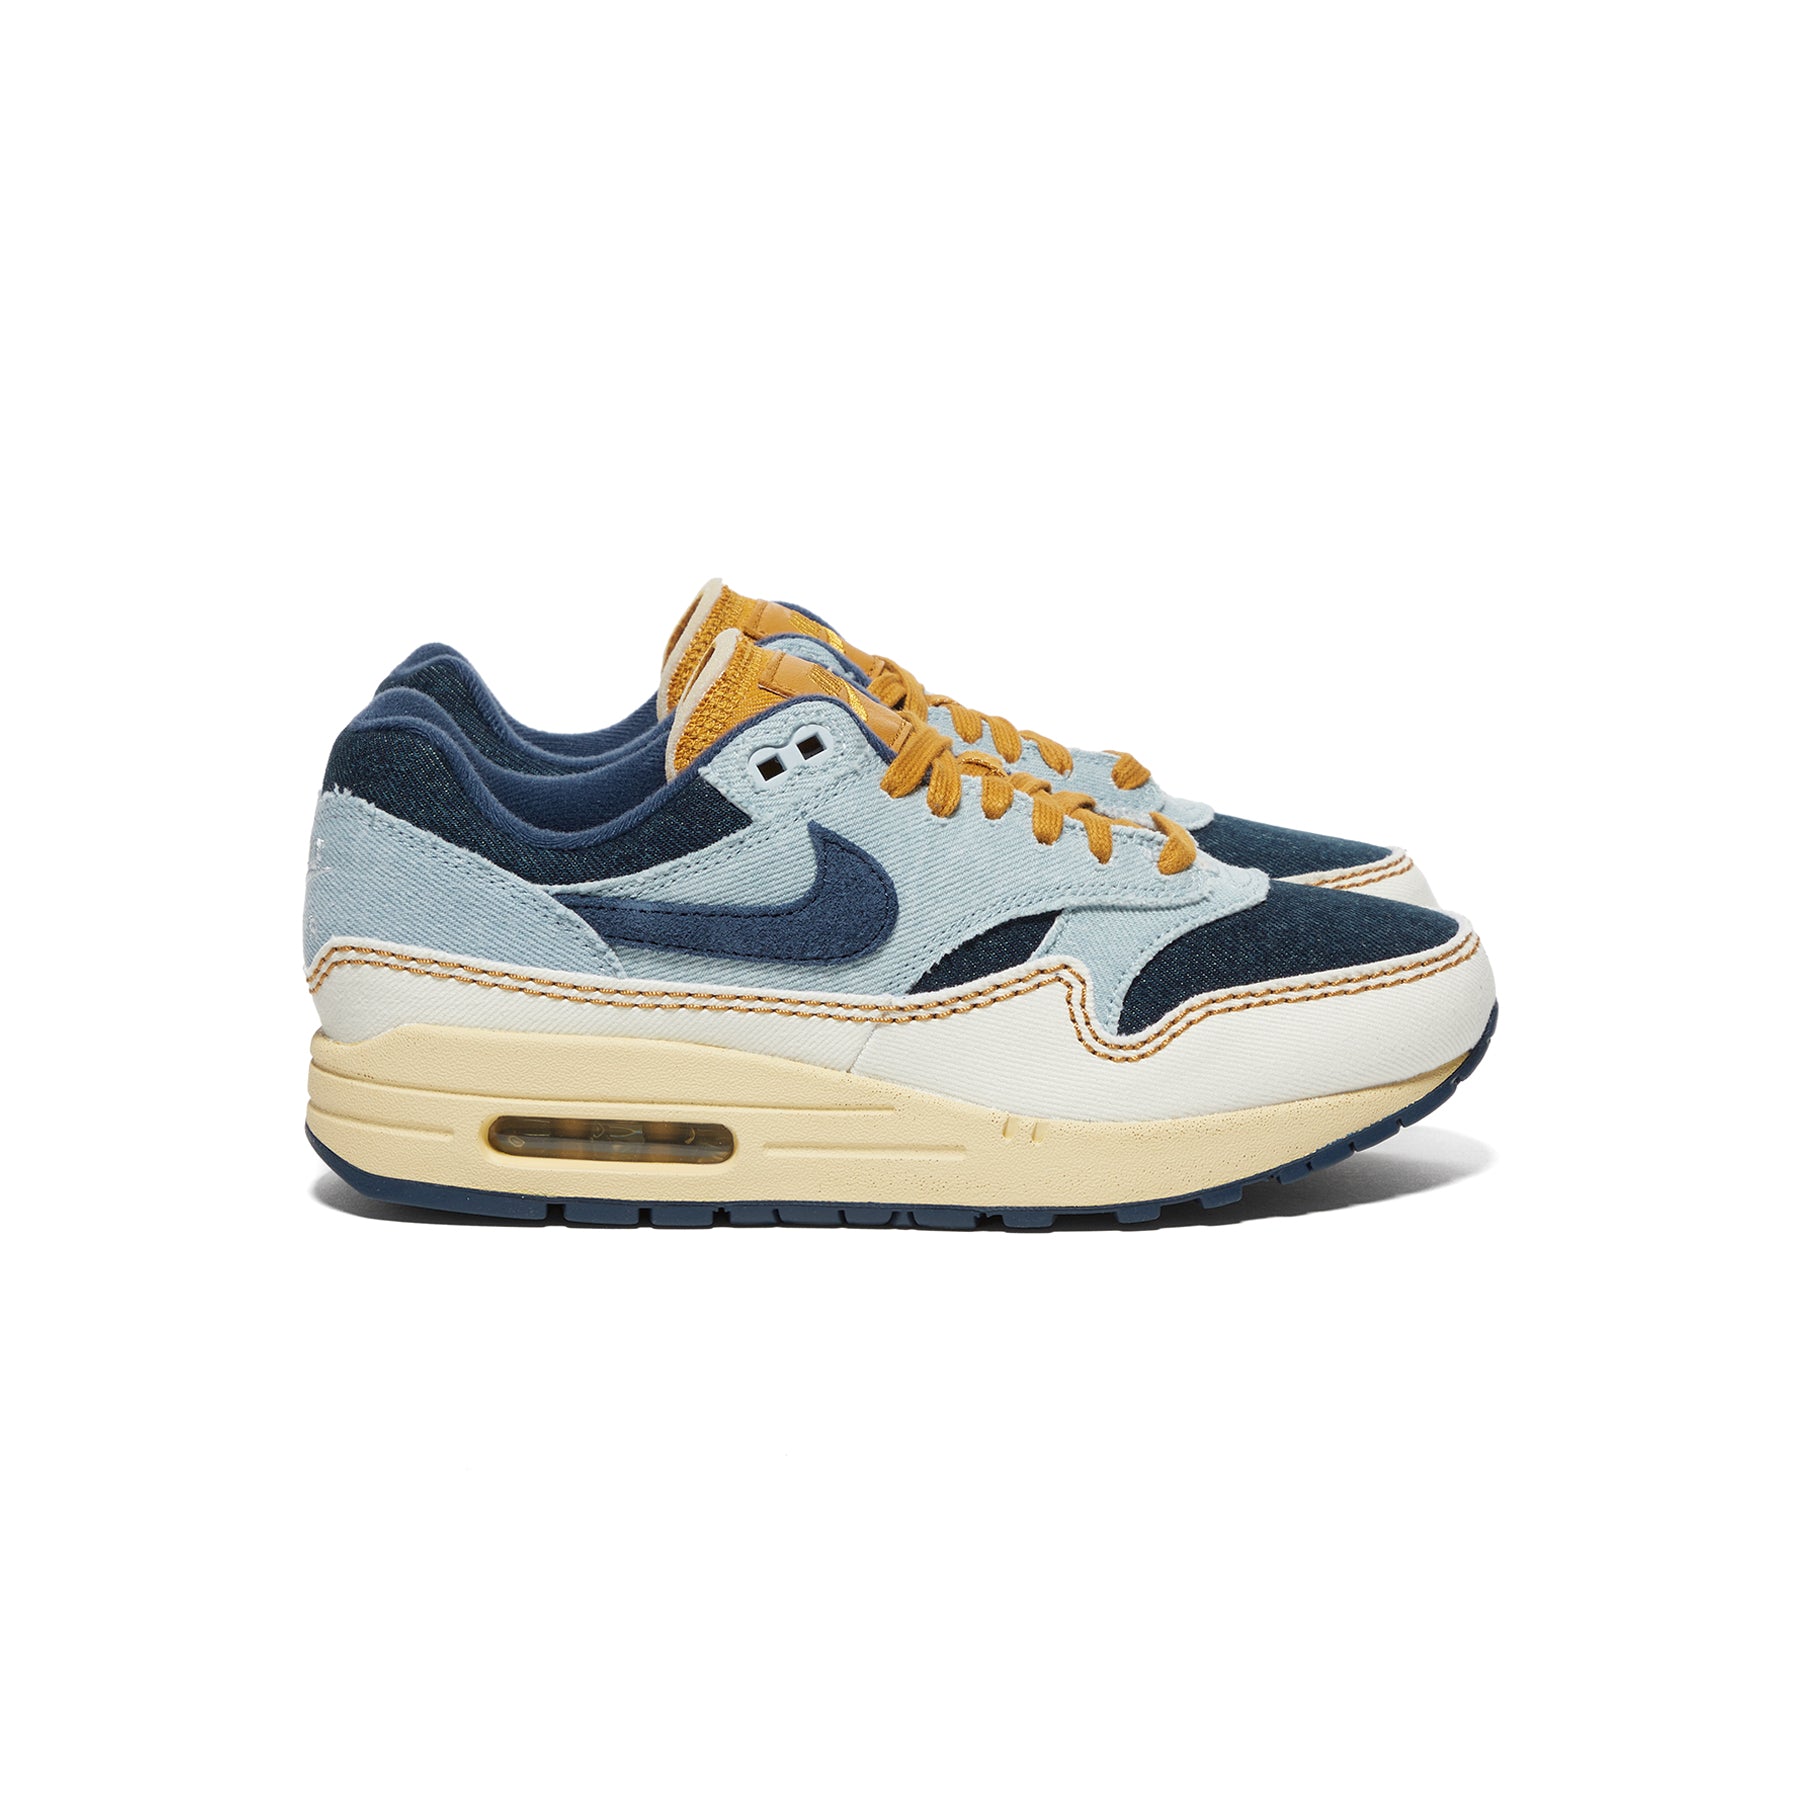 Nike Womens Concepts Max – \'87 Ivory) Navy/Pale Air 1 (Aura/Midnight